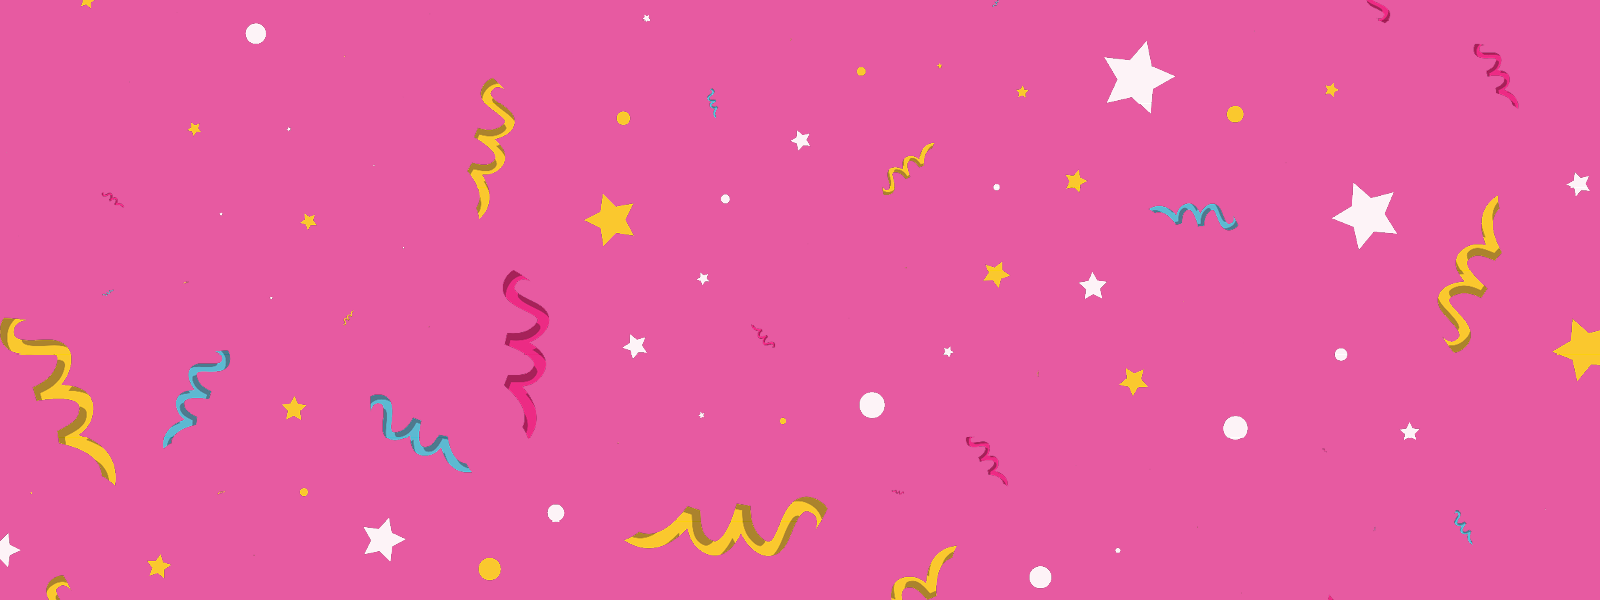 Bright pink background with white, yellow, blue and pink confetti.